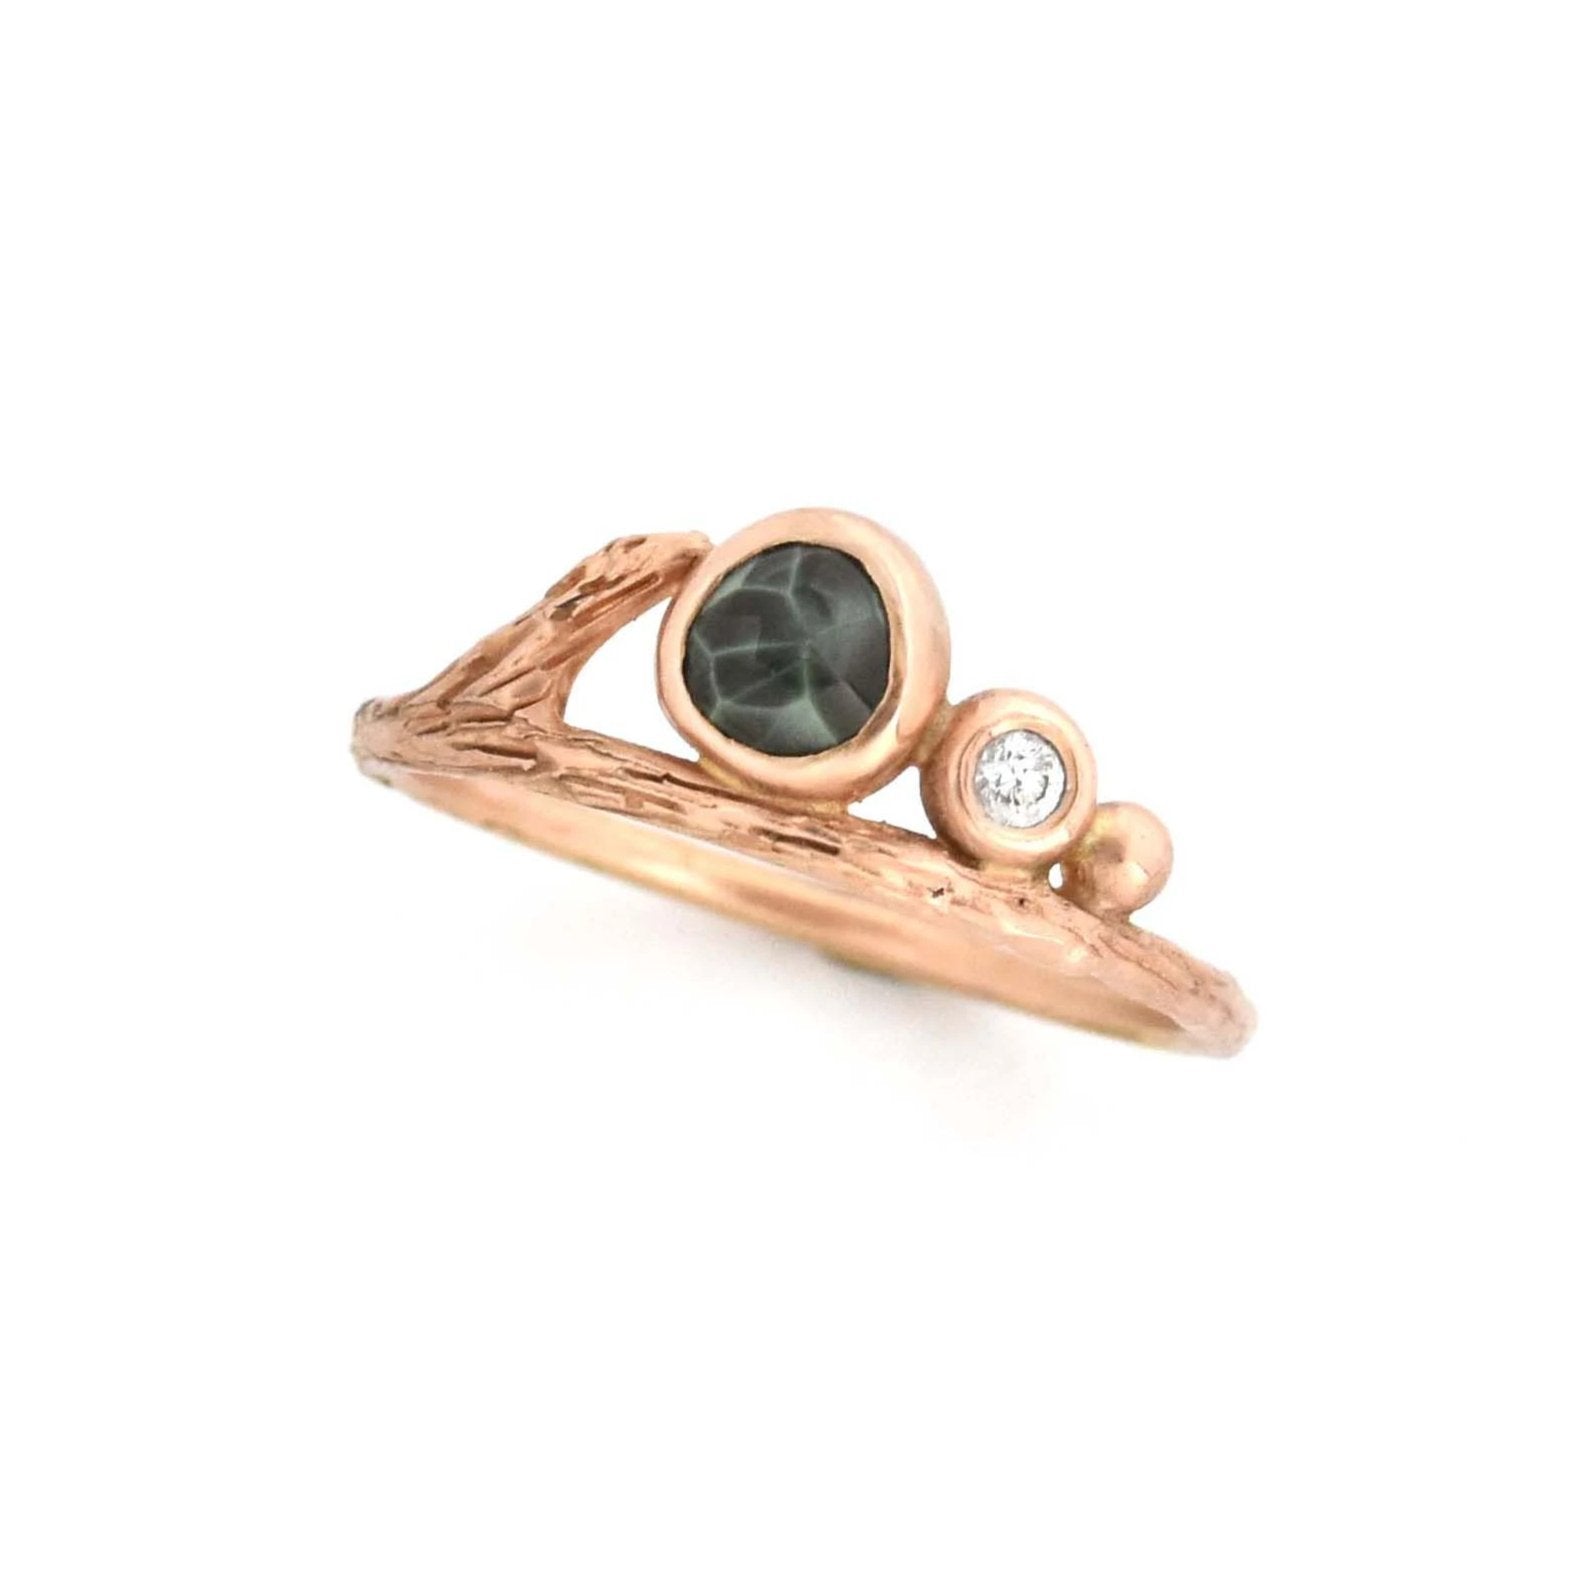 Gold Delicate Dewdrop Ring - your choice of stone and gold - Wedding Ring  14K Rose Gold / A  14K Rose Gold / B 3486 - handmade by Beth Millner Jewelry